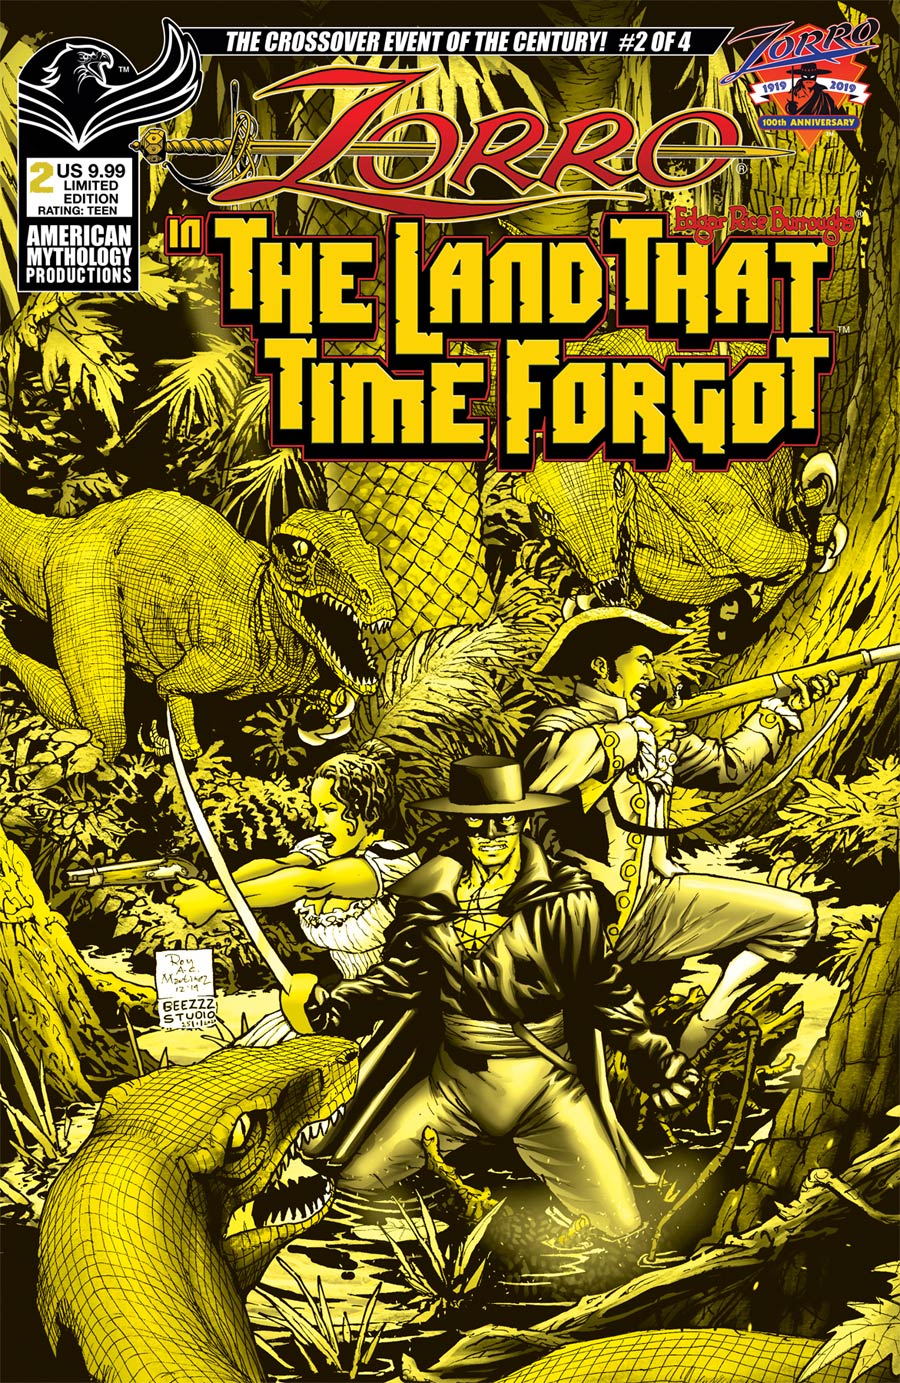 Zorro In The Land That Time Forgot #2 Cover B Limited Edition Roy Allan Martinez Variant Cover